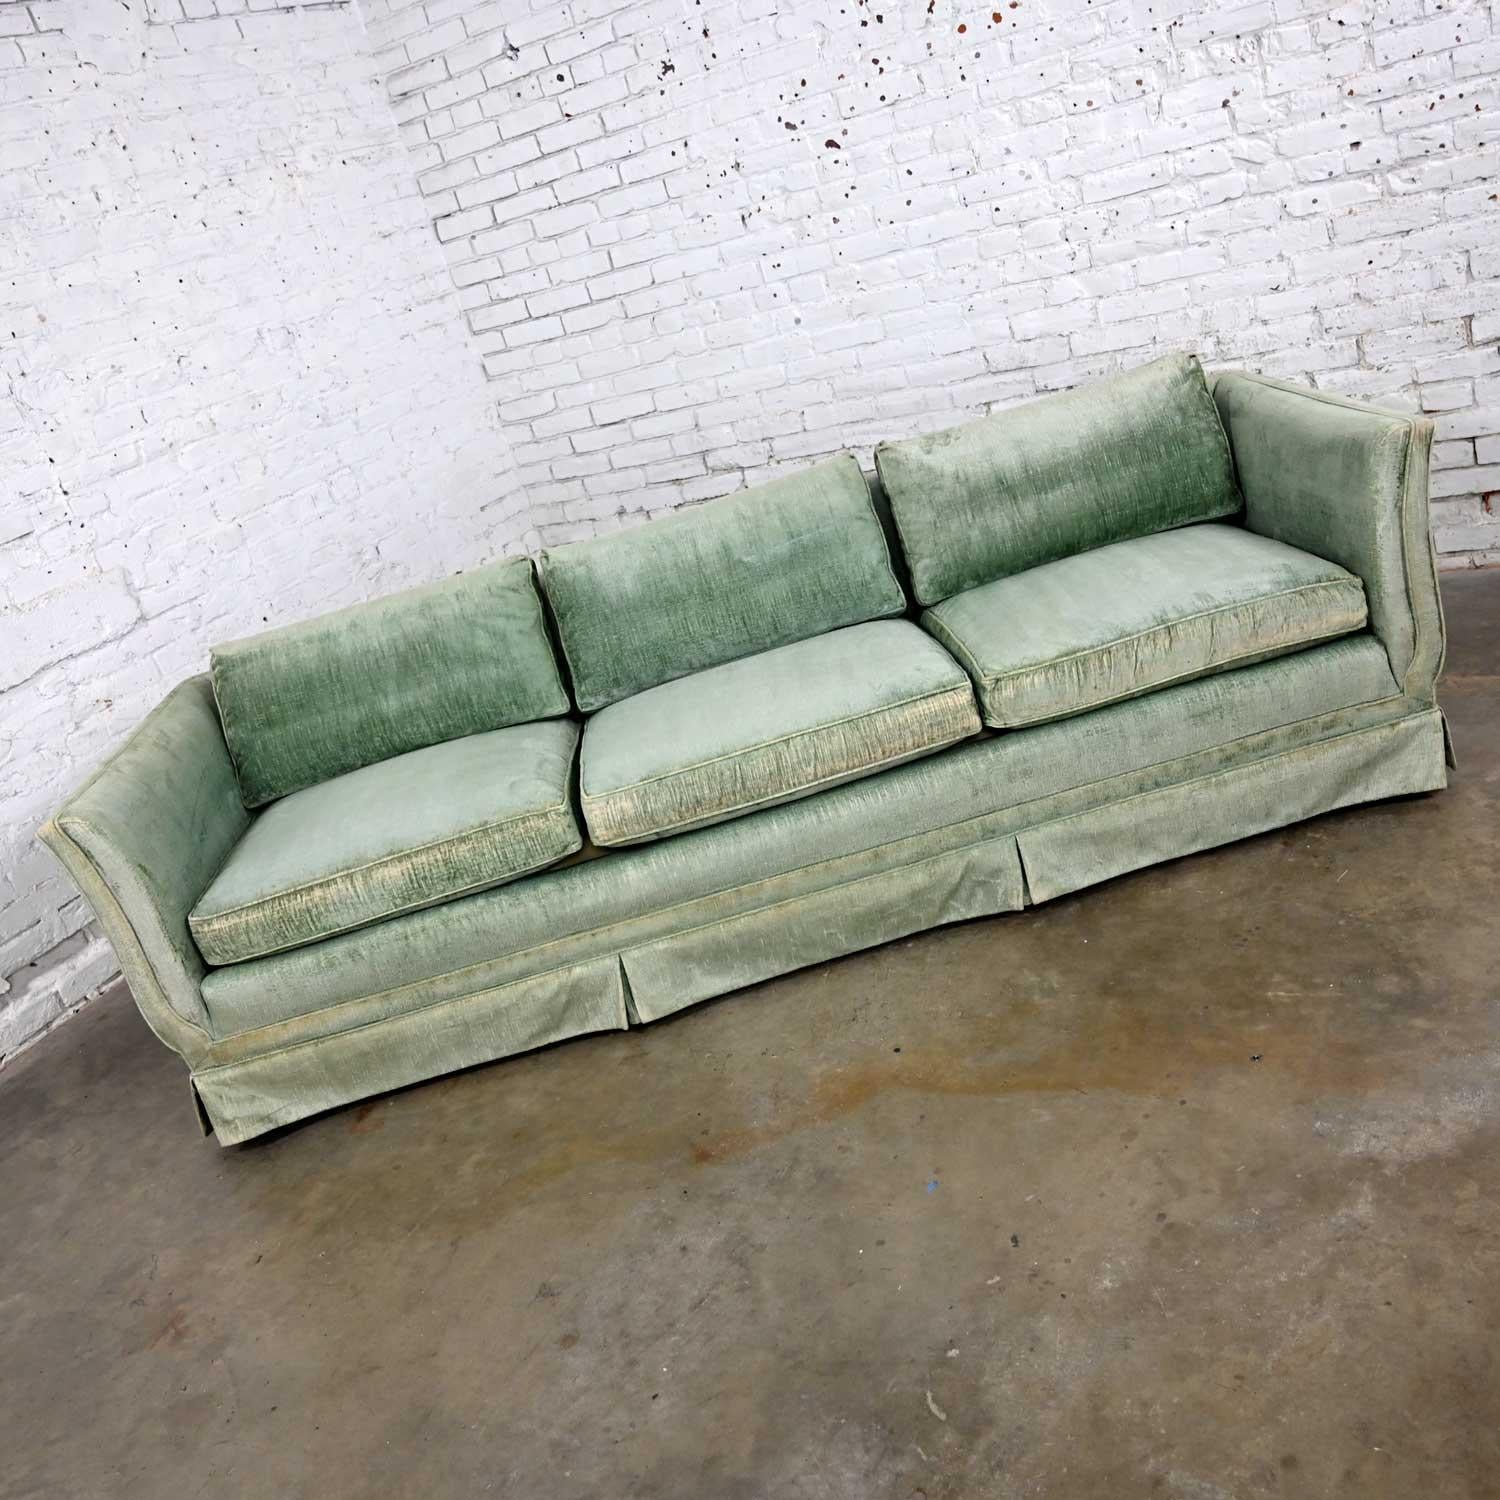 Fabulous vintage modern and Hollywood Regency and a bit Art Deco mint green velvet modified tuxedo style sofa by Henredon. Beautiful condition, keeping in mind that this is vintage and not new so will have signs of use and wear. The original velvet